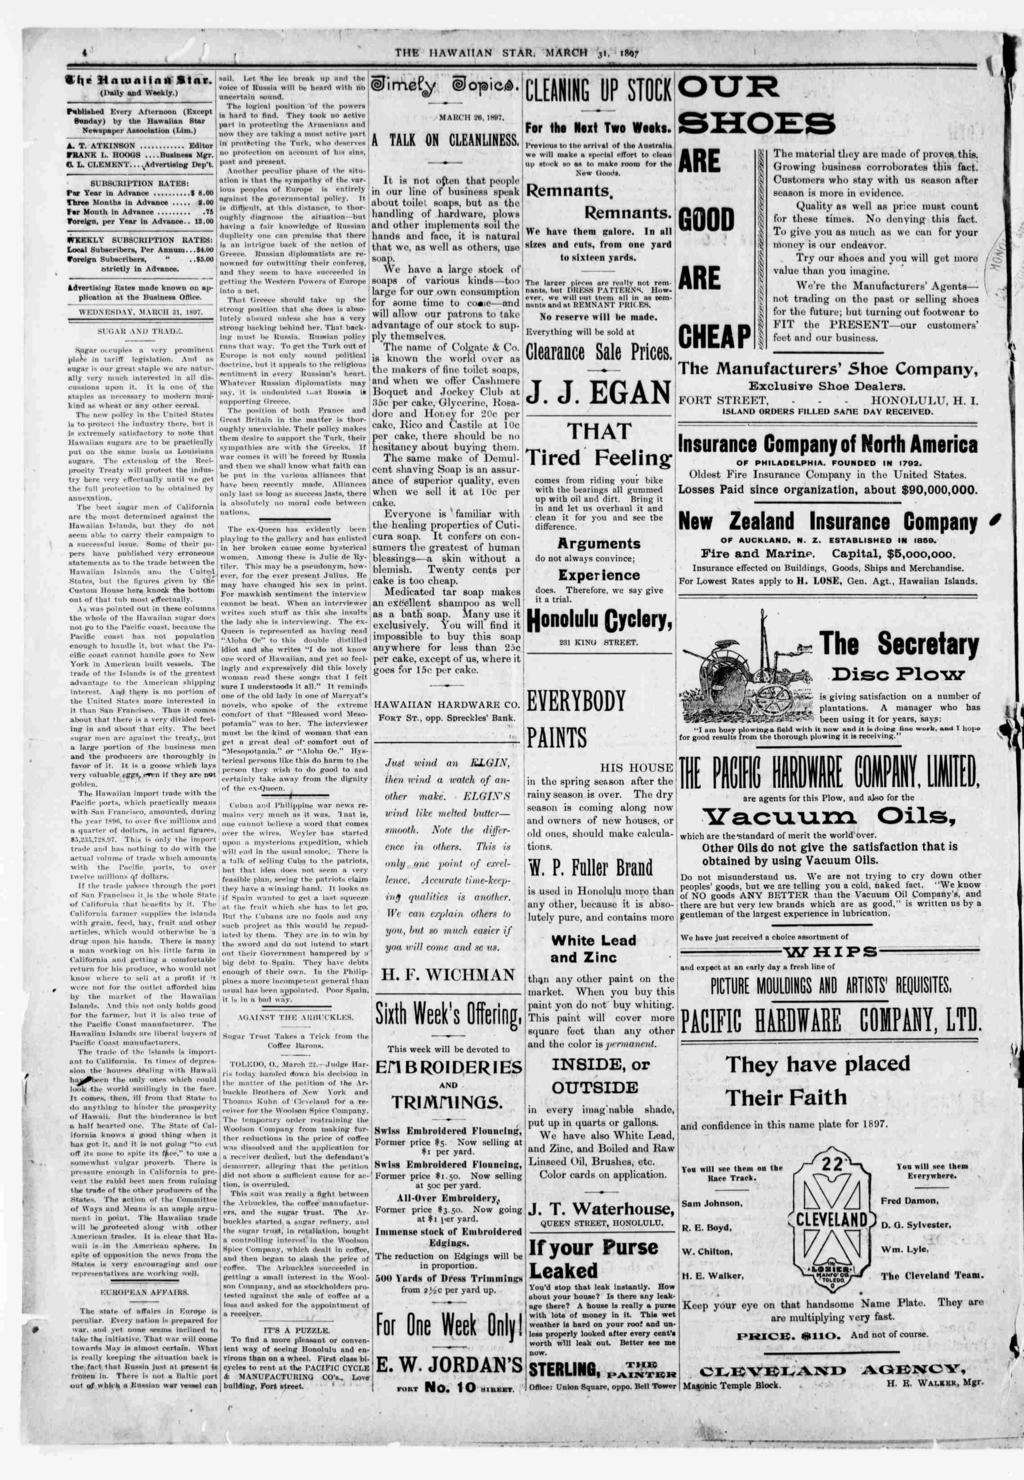 r k f a c HnunnVSnv. (Rally and Weekly.) Publshed Every Afernoon (Excep Bundny) by ho llawallan Sar Newspaper Assocaon (Lm.) A. T. ATKNSON Edor THANK L. OOQS...Busness Mgr. G. L. CLEMENT....Adversng Dcp.